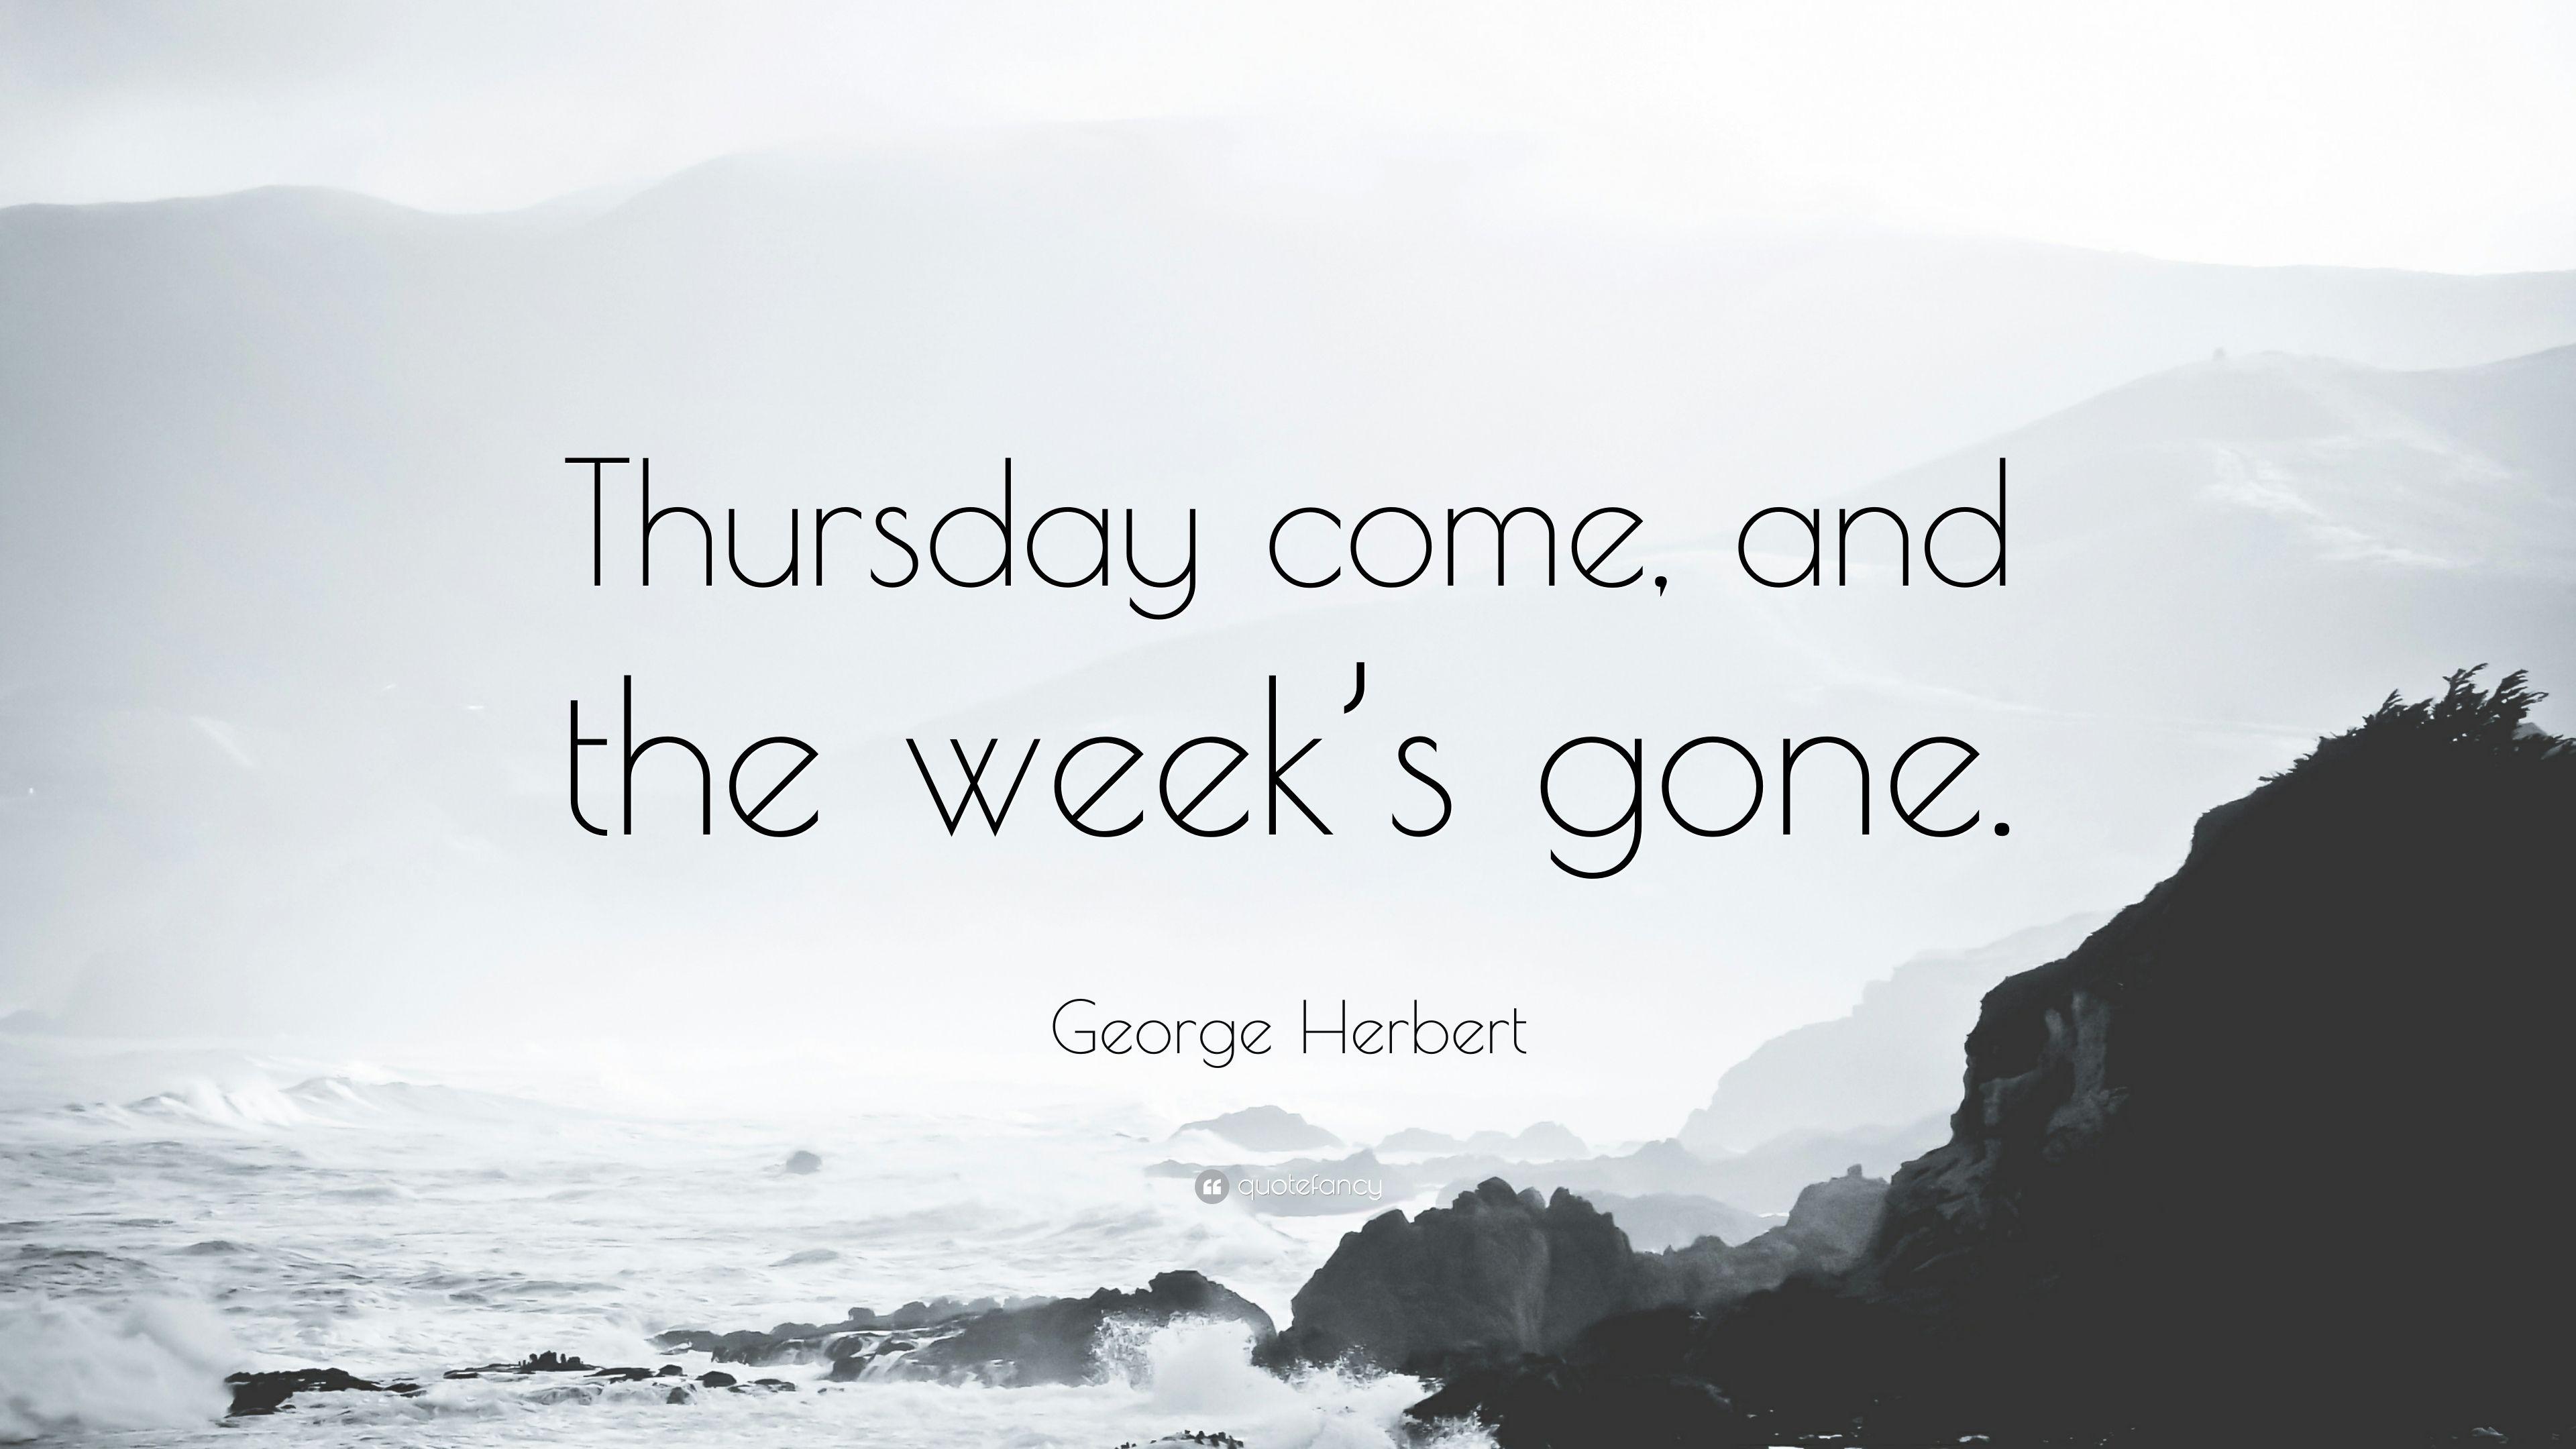 George Herbert Quote: “Thursday come, and the week's gone.” 7